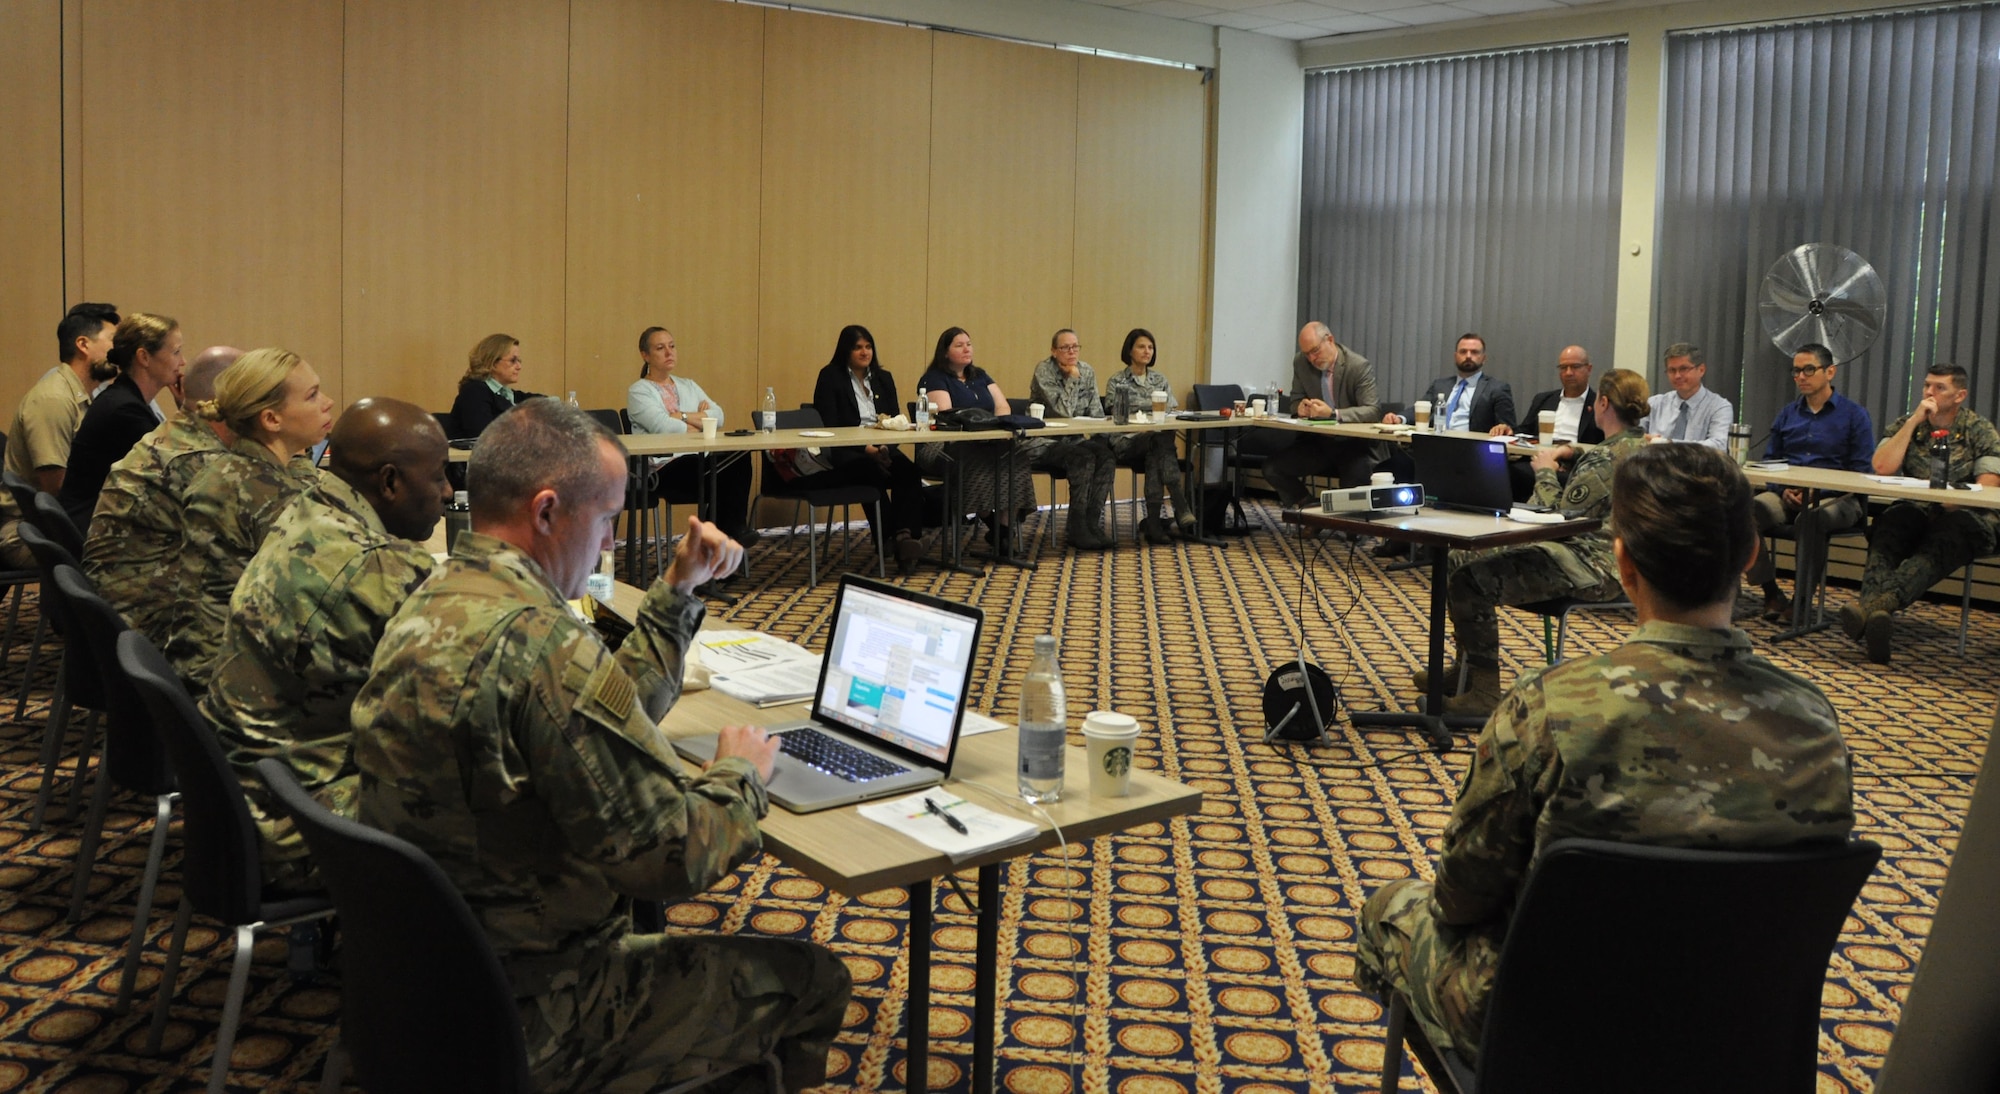 The AFRICOM Office of the Command Surgeon hosted various U.S. agencies during the first ever Infectious Disease Strategic Planning Workshop on Patch Barracks in Stuttgart, Germany, from Sept. 4-6, 2019. The workshop was developed to discuss U.S. government efforts pertaining to infectious disease prevention and response in Africa and included interagency support from the Centers for Disease Control and Prevention, the U.S. Agency for International Development, U.S. Department of State and combat support agency, the Defense Threat Reduction Agency. The workshop will better enable U.S. AFIRCOM to operationalize the U.S. AFRICOM Theater Campaign Plan by modifying their Security Force Assistance strategy. (U.S. Air Force photo by Master Sgt. Megan Crusher)